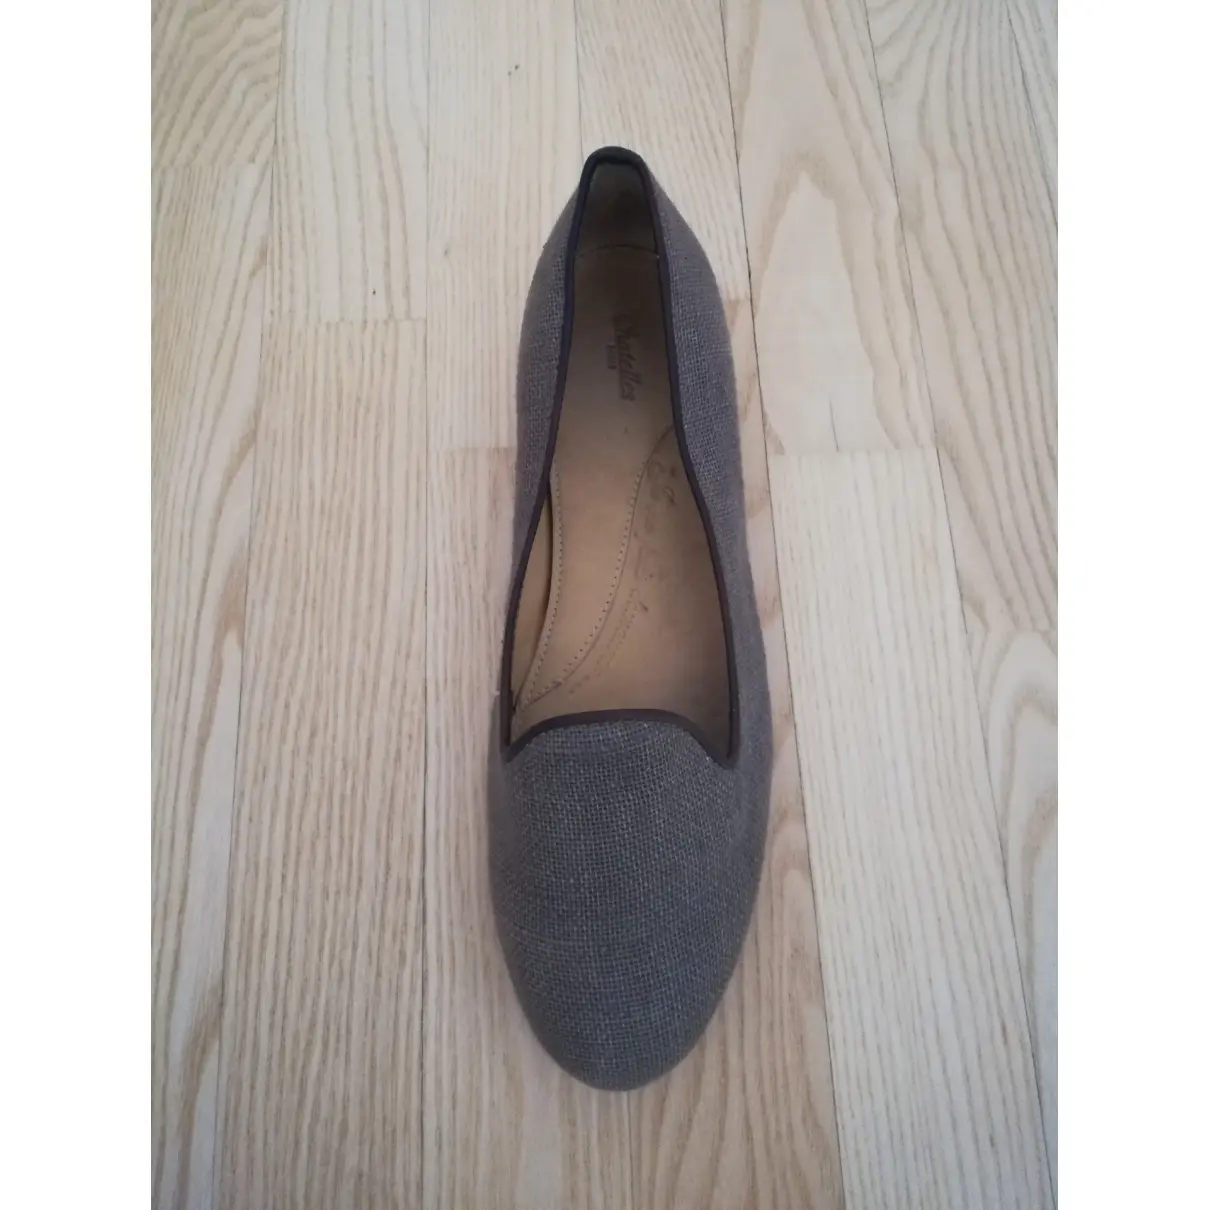 Chatelles Leather flats for sale